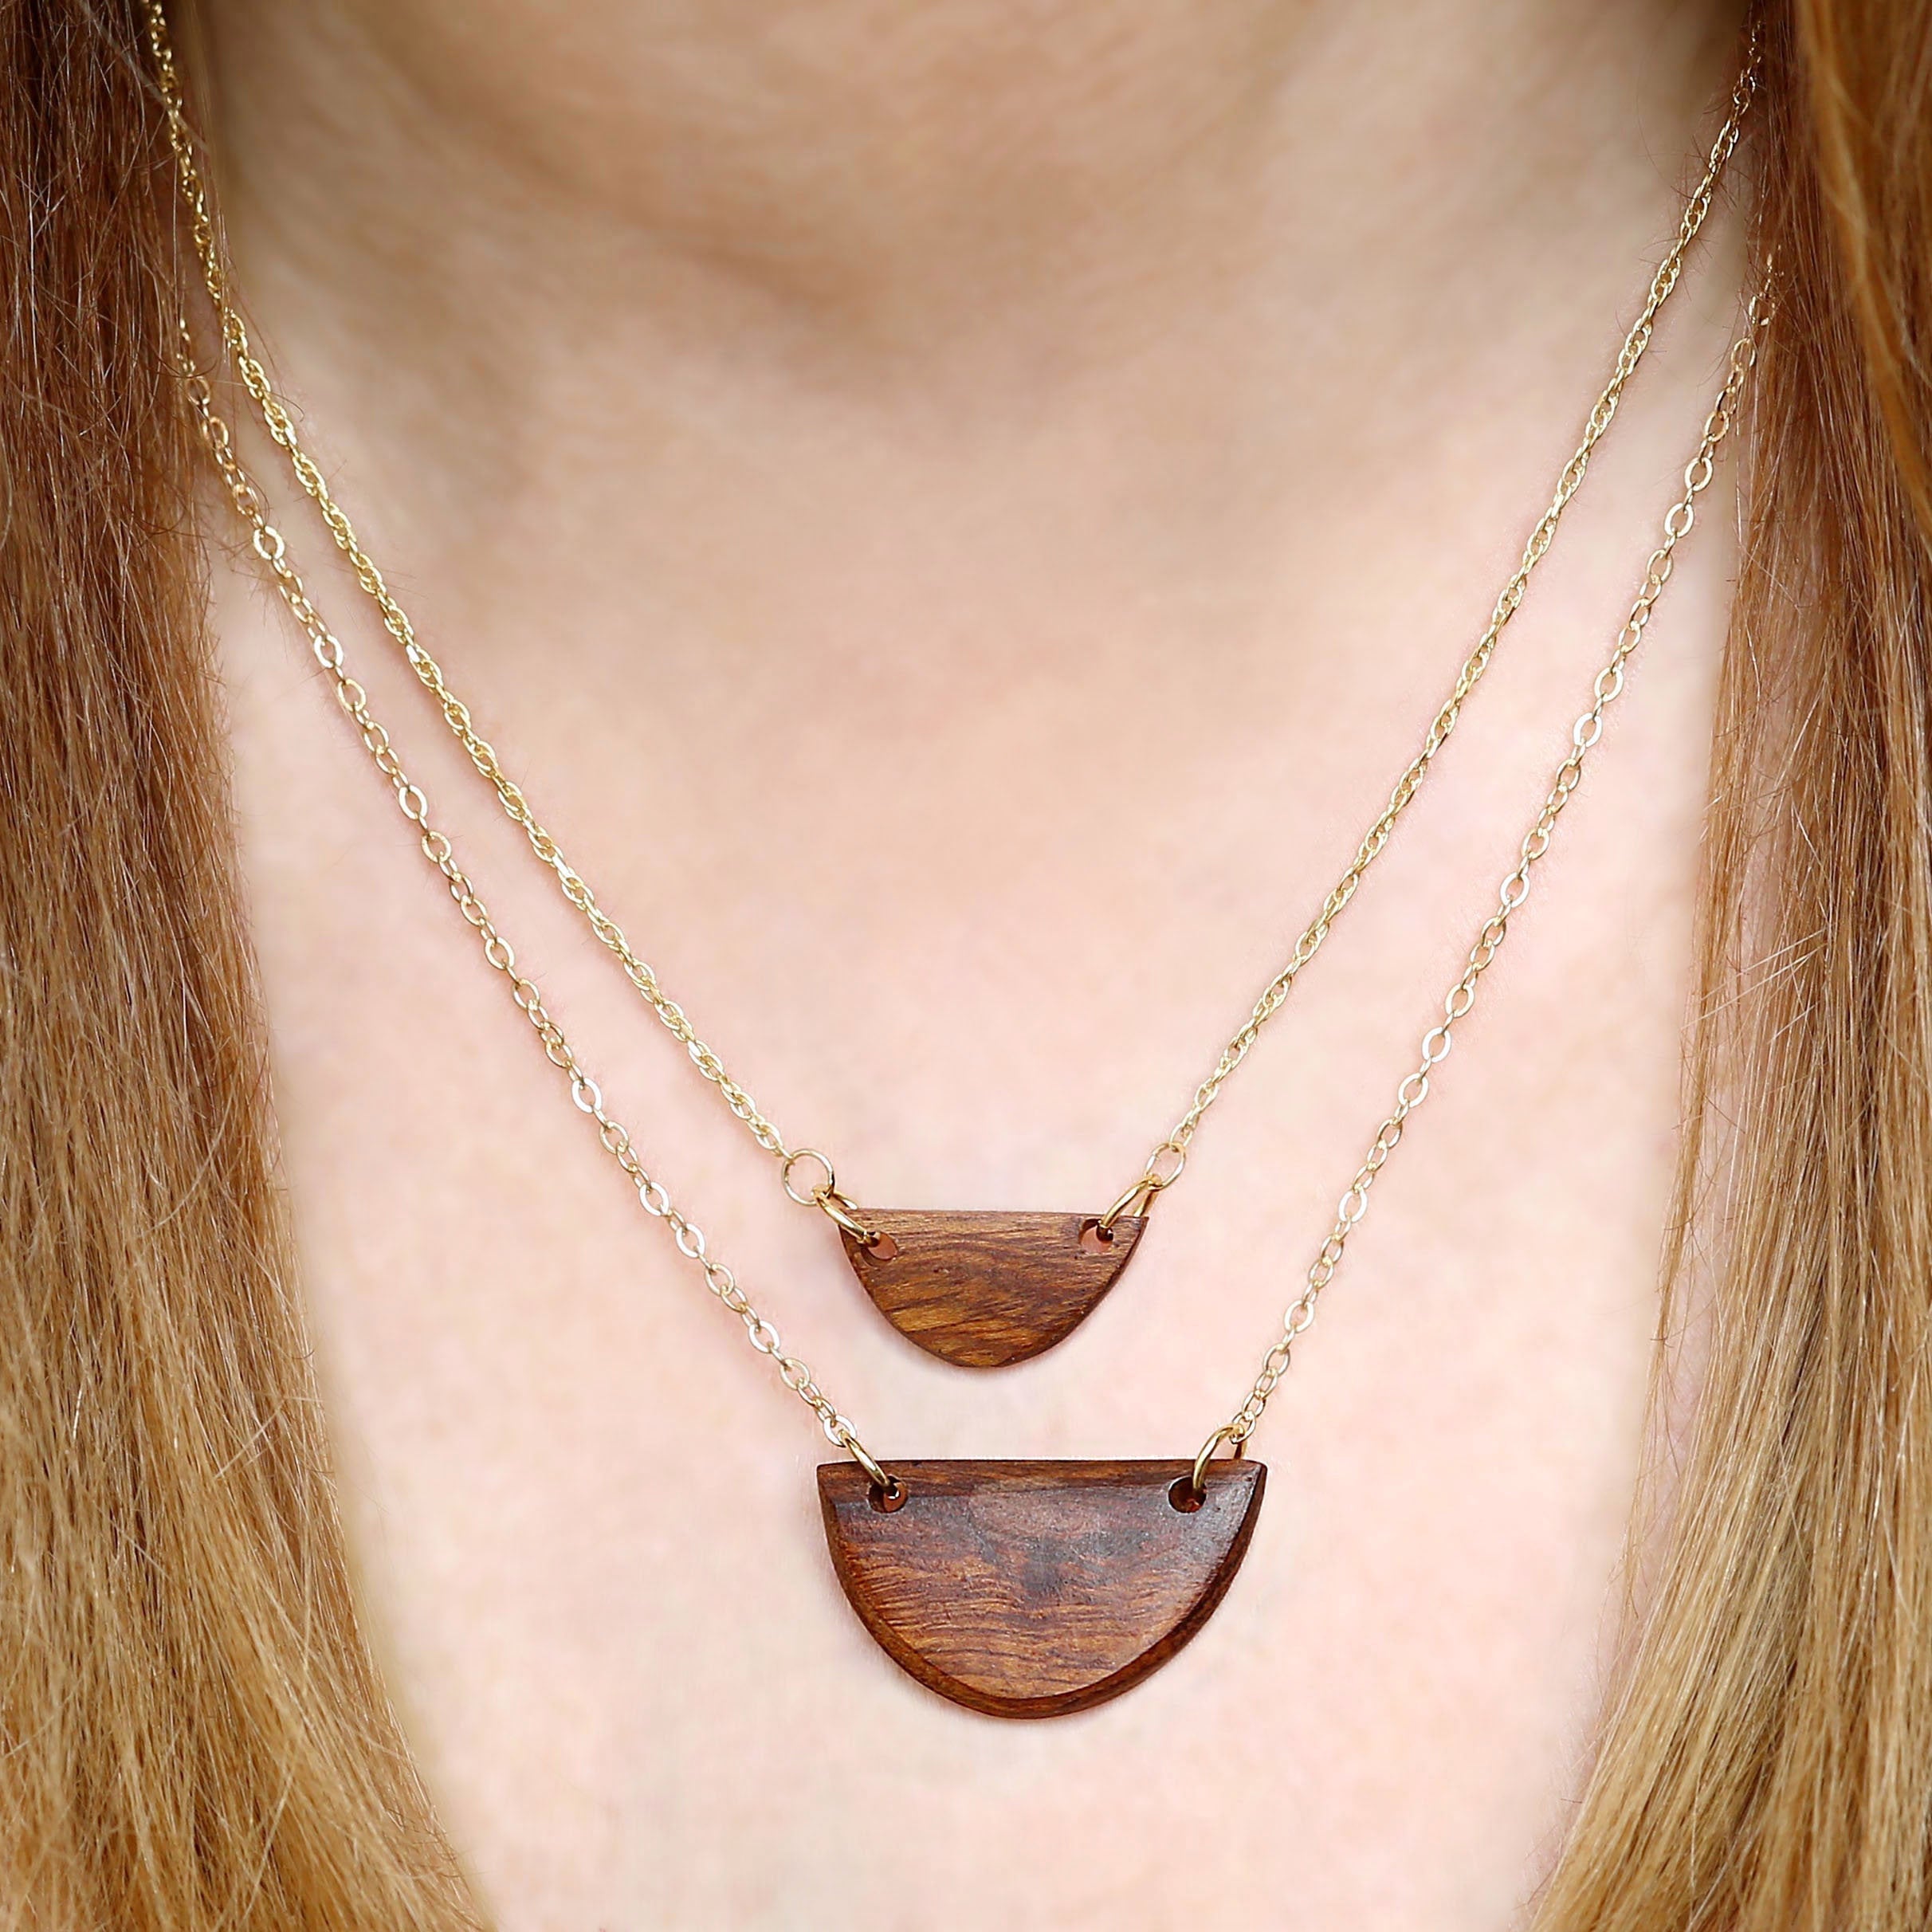 Hand wood necklace with starfish, fish, turtle orhorseshoe pendant made in sustainable jewelry,  Carved ironwood necklace, Exotic wood